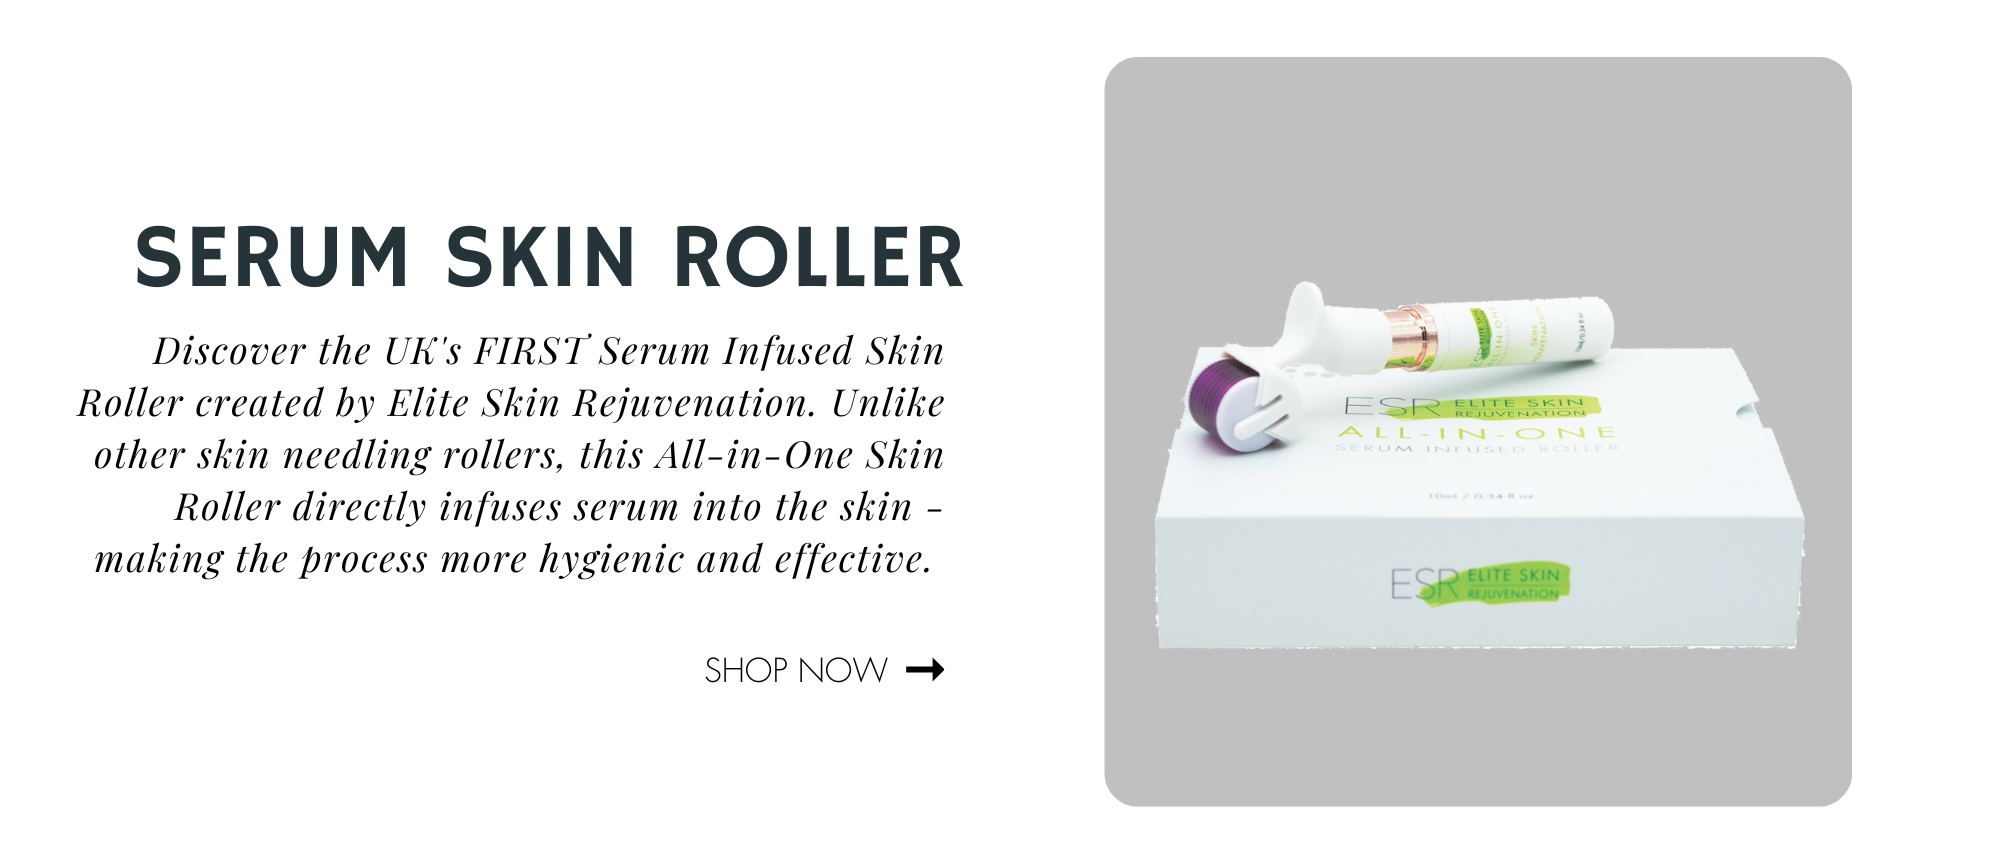 Discover the UK's FIRST Serum Infused Skin Roller created by Elite Skin Rejuvenation. Unlike other skin needling rollers, this All-in-One Skin Roller directly infuses serum into the skin - making the process more hygienic and effective. The roller has fine 0.25 millimetre needles that gently glide over the skin creating micro punctures, while serum flows into the skin simultaneously. The roller helps reduce fine lines and minimises pores, improves skin elasticity and scars including acne and overall pigmentation.